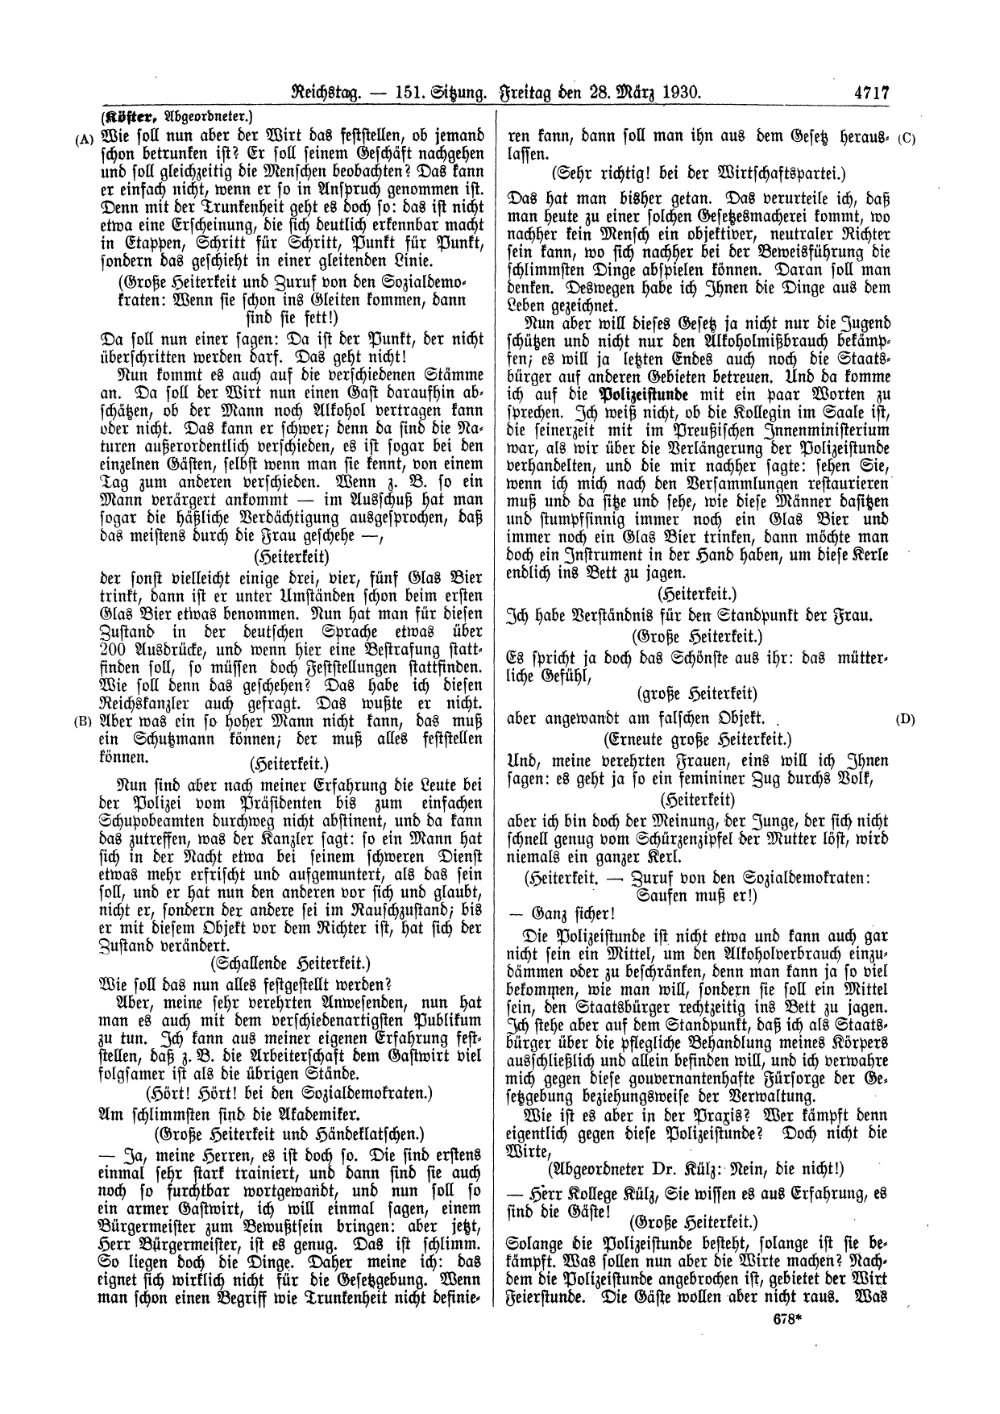 Scan of page 4717